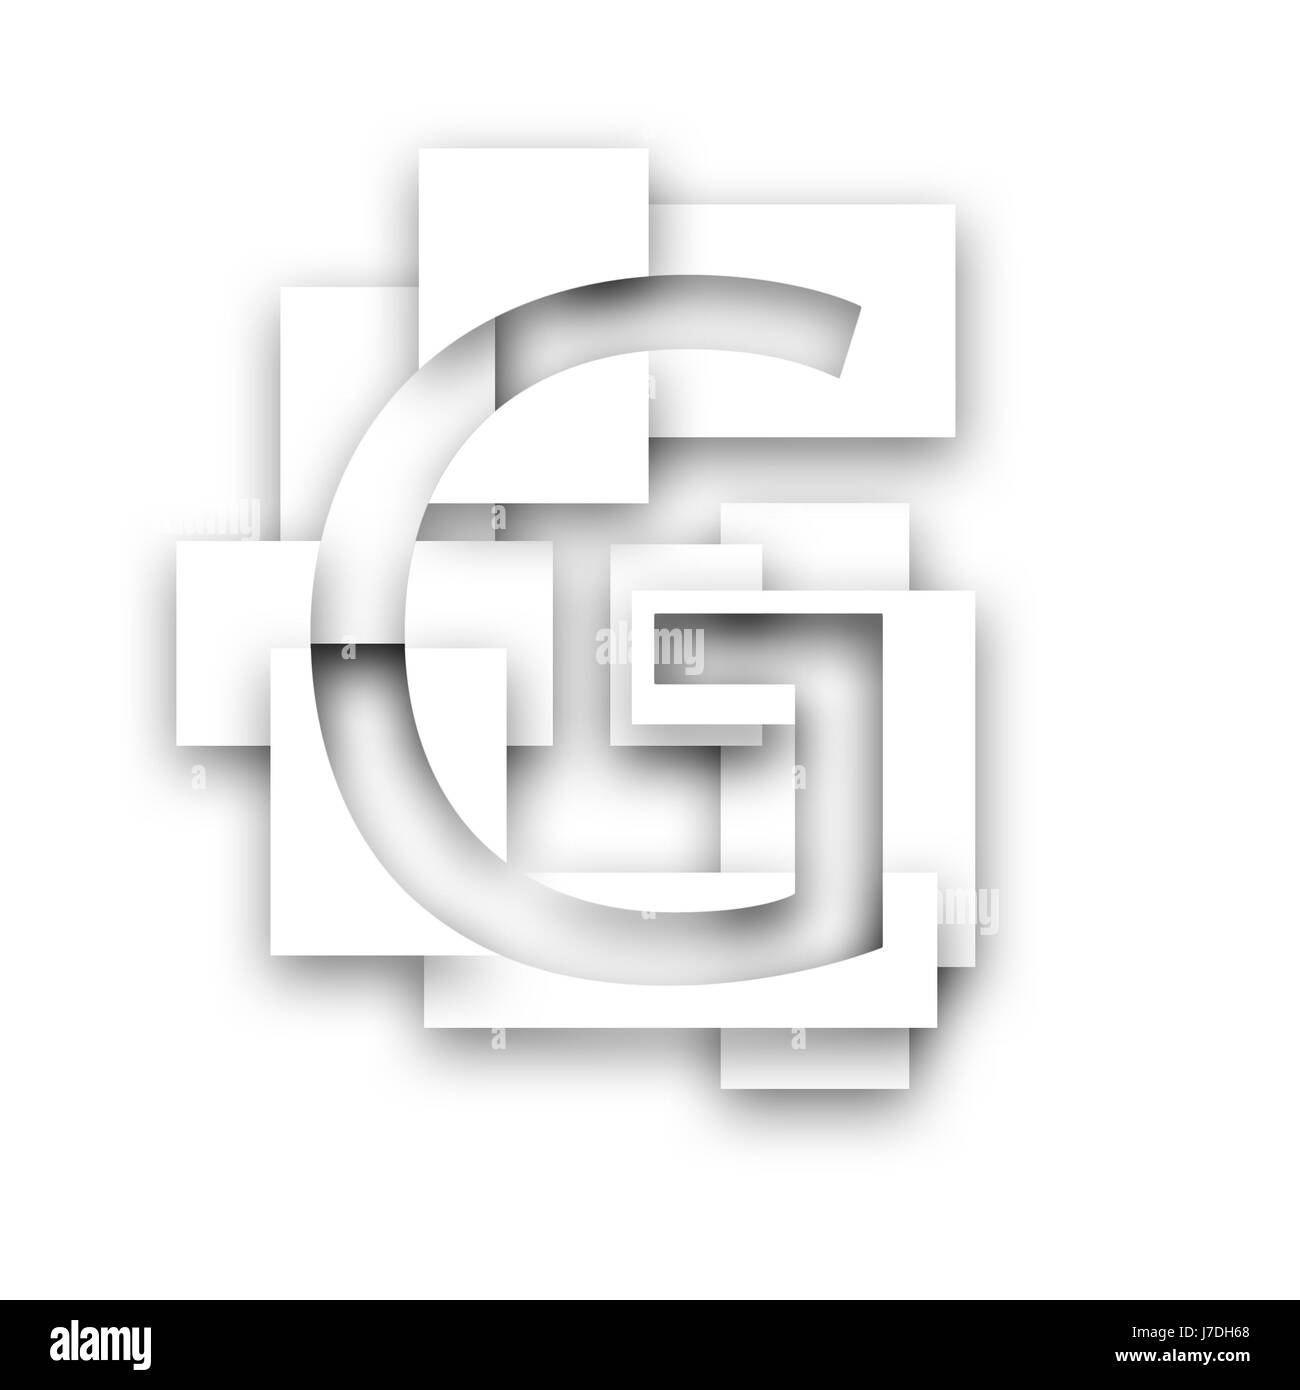 Letter g Black and White Stock Photos & Images - Alamy